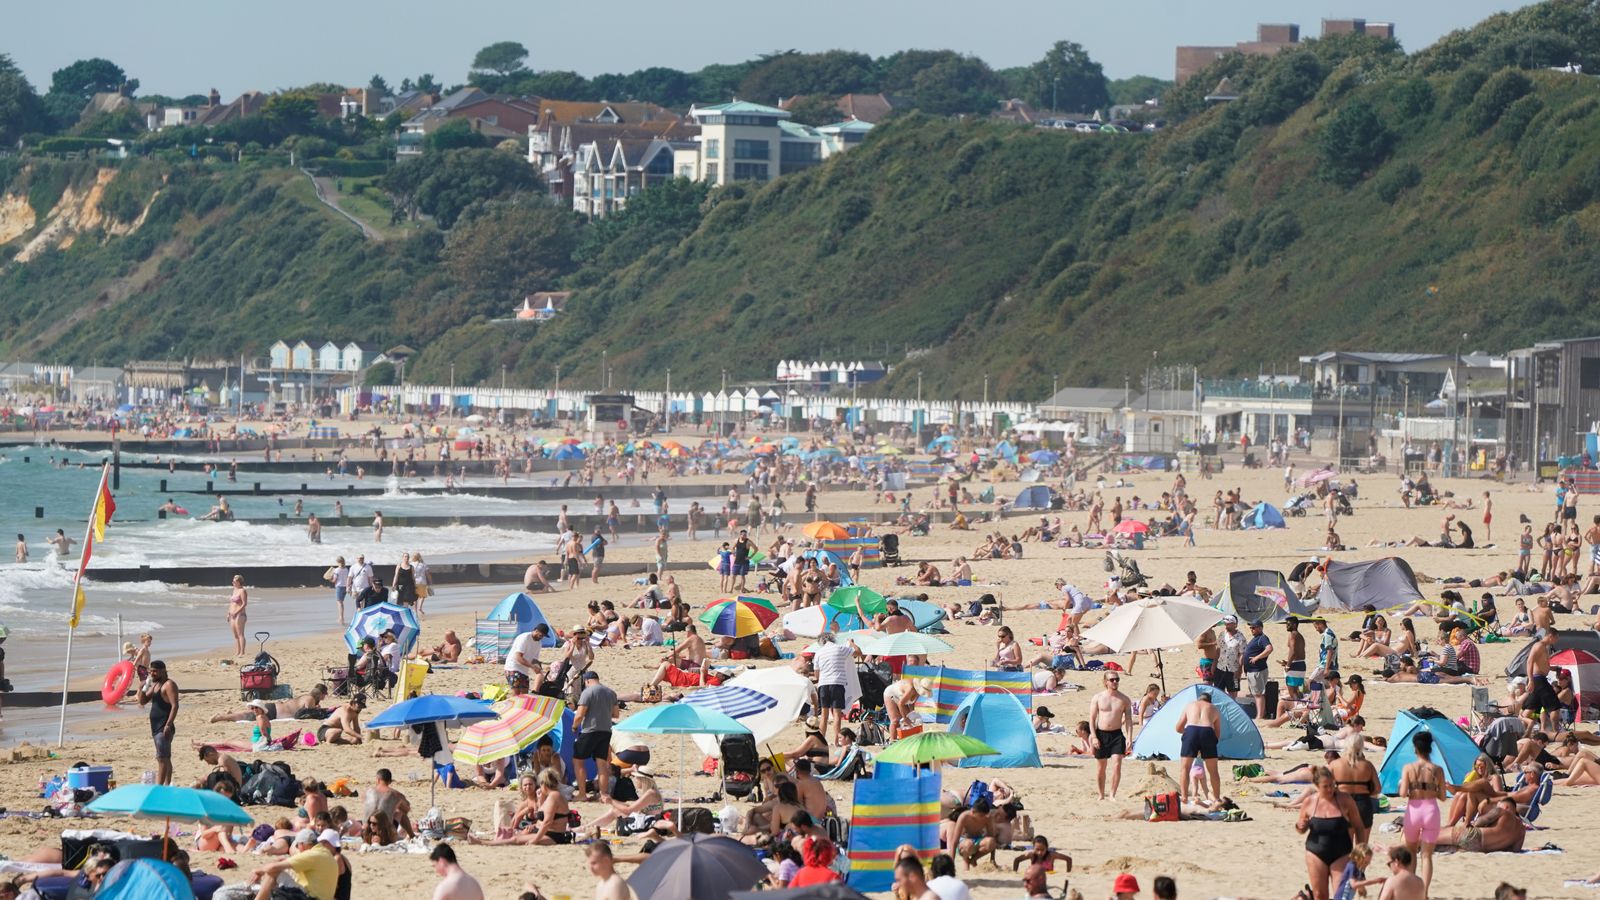 UK weather: Temperatures set to rise - with some areas forecast to be as hot as Ibiza